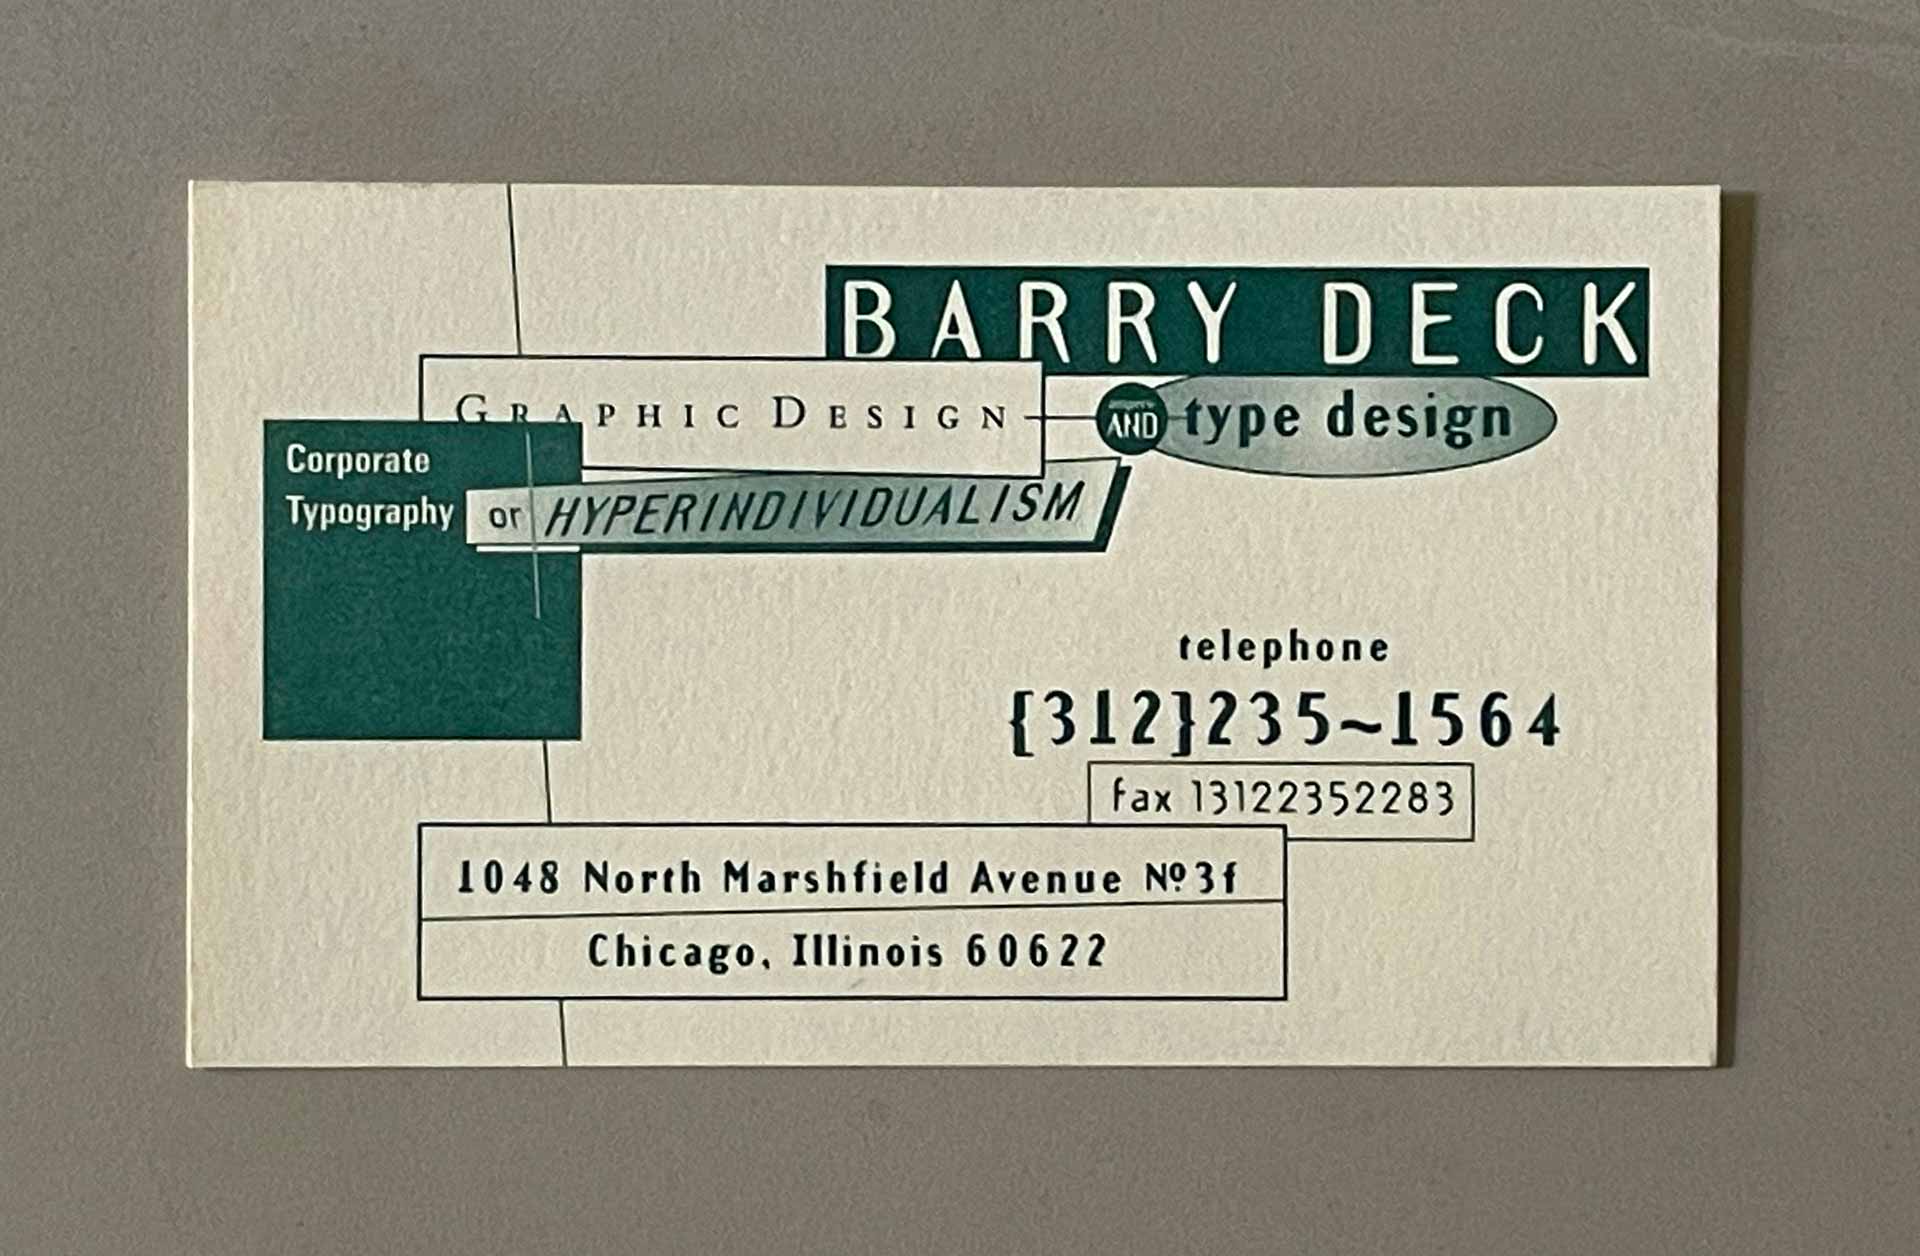 Barry Deck hyperindividualism business card from 1991